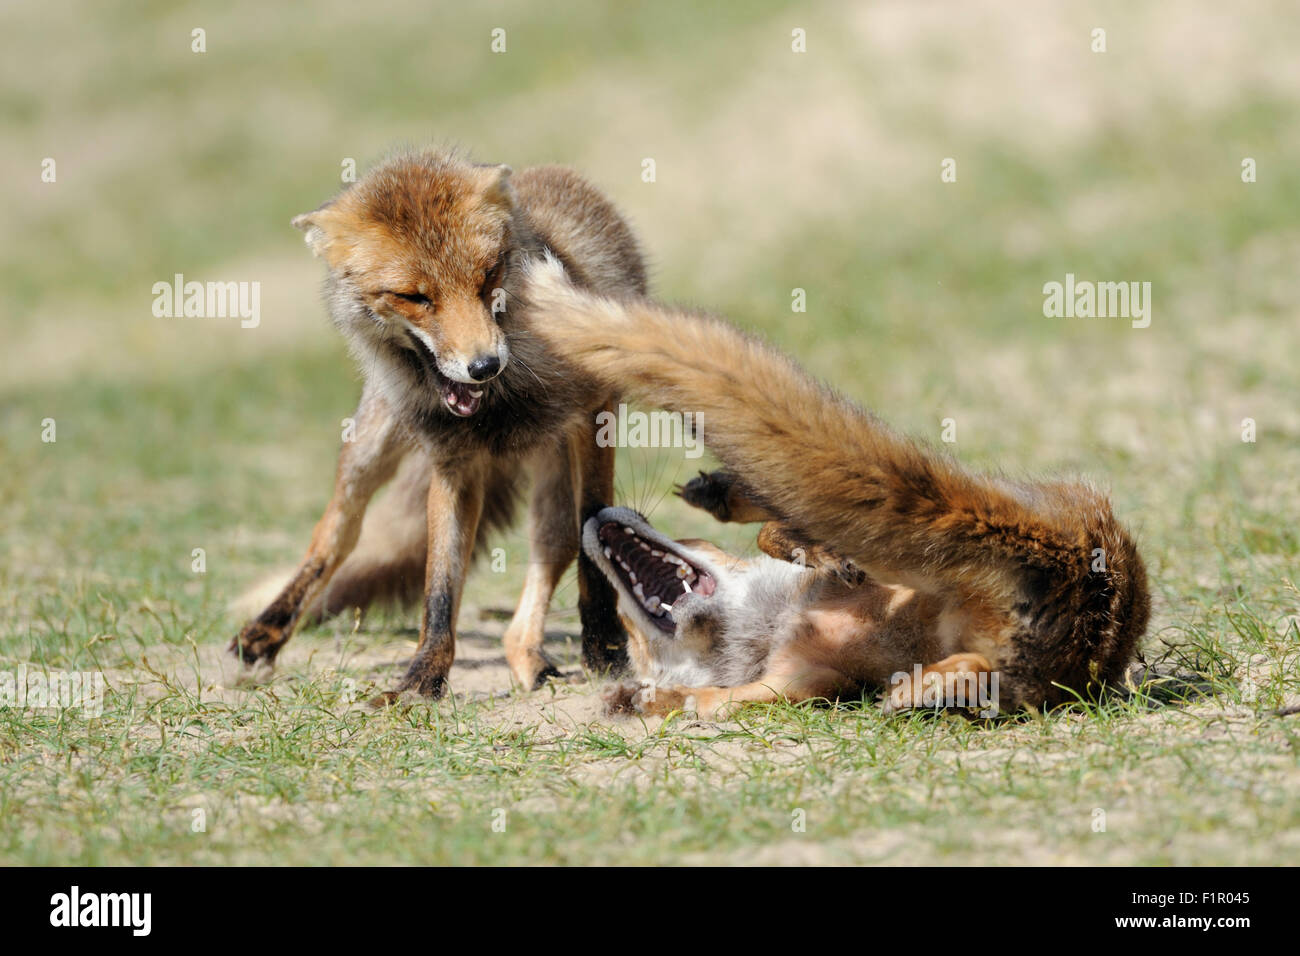 Two Red Foxes / Rotfuechse ( Vulpes vulpes ), rivals in fierce fight, struggle, chasing each other. Stock Photo